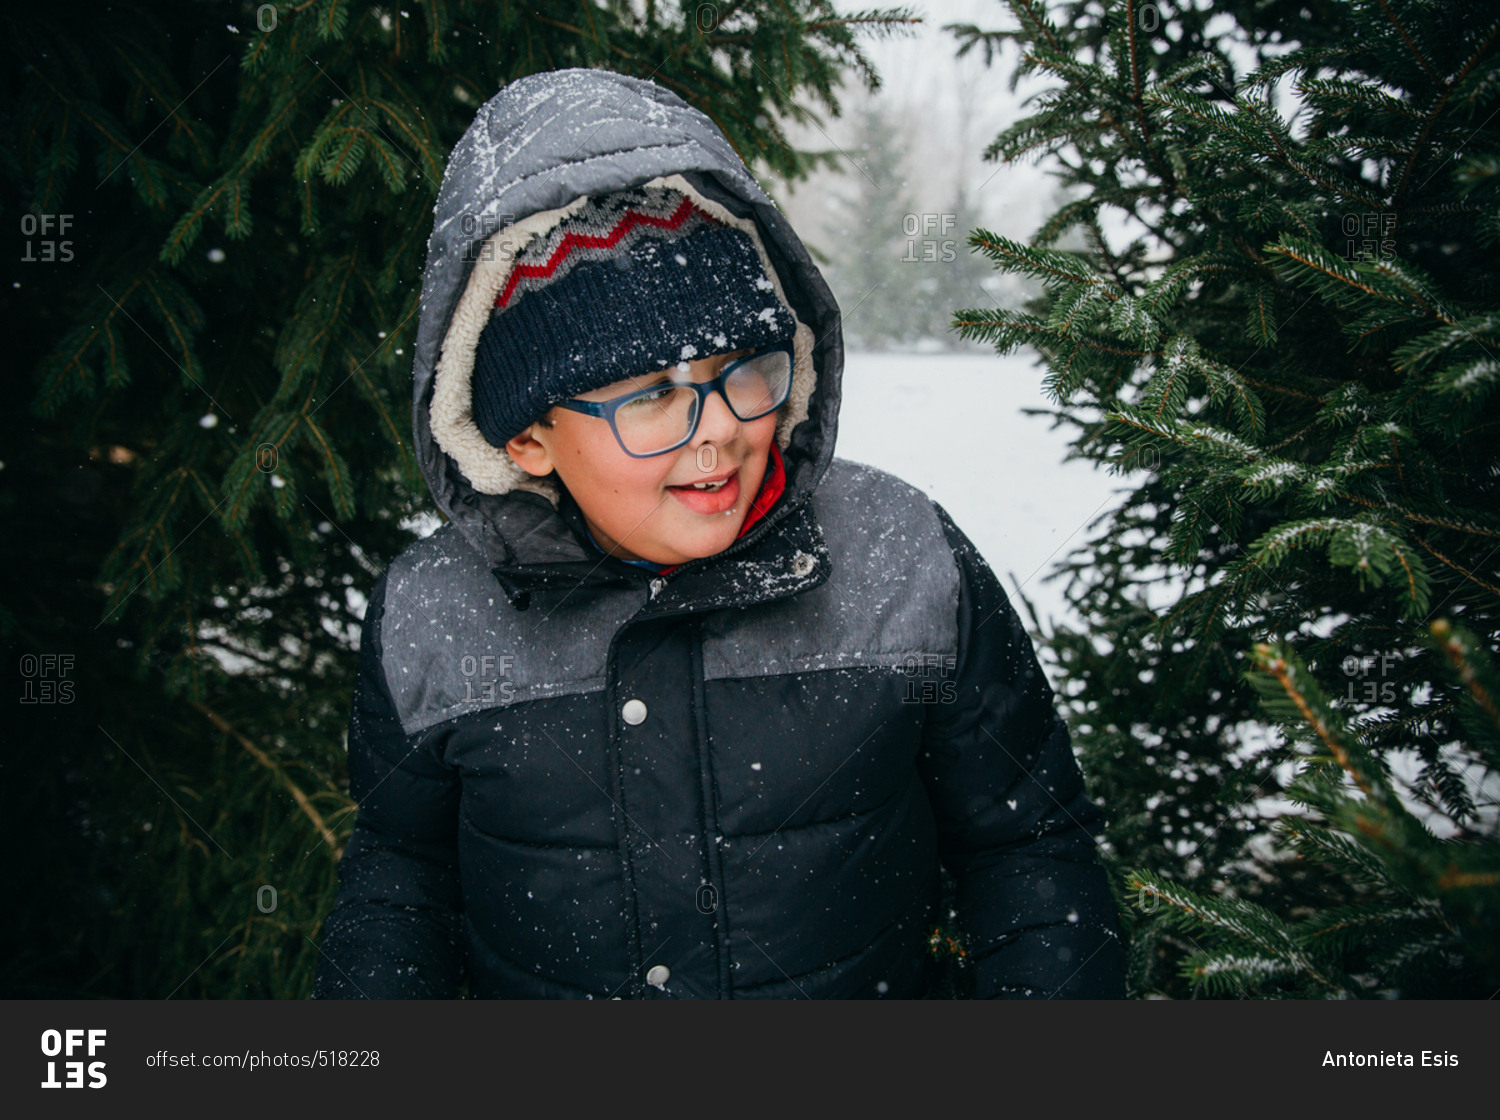 Young boy with glasses amidst pine trees in snowy weather